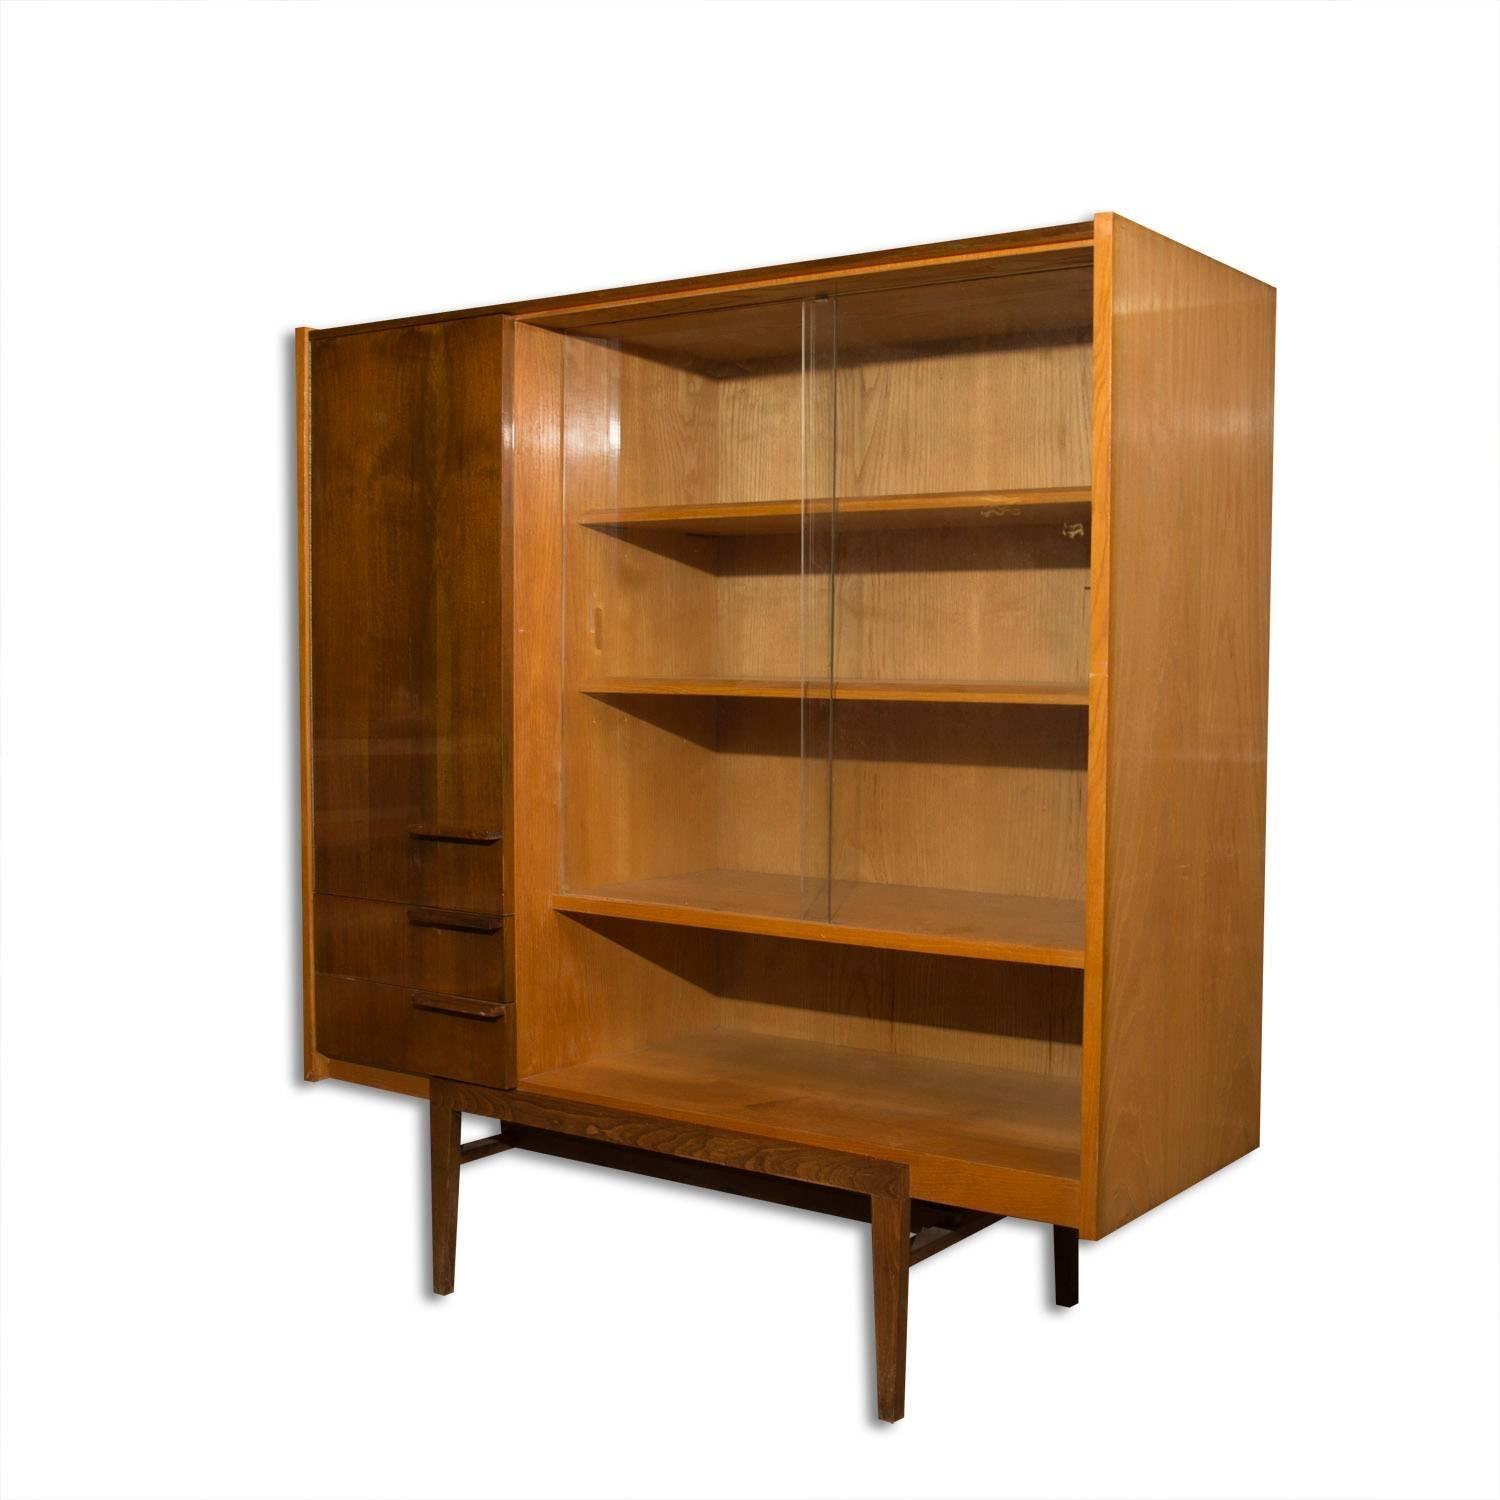 Midcentury Czechoslovak Library cabinet, designed by František Mezulánik and produced by ÚP Závody in the 1960s. Material: wood, plywood, walnut veneer. The cabinet is in its good original condition with minor signs of age and use.